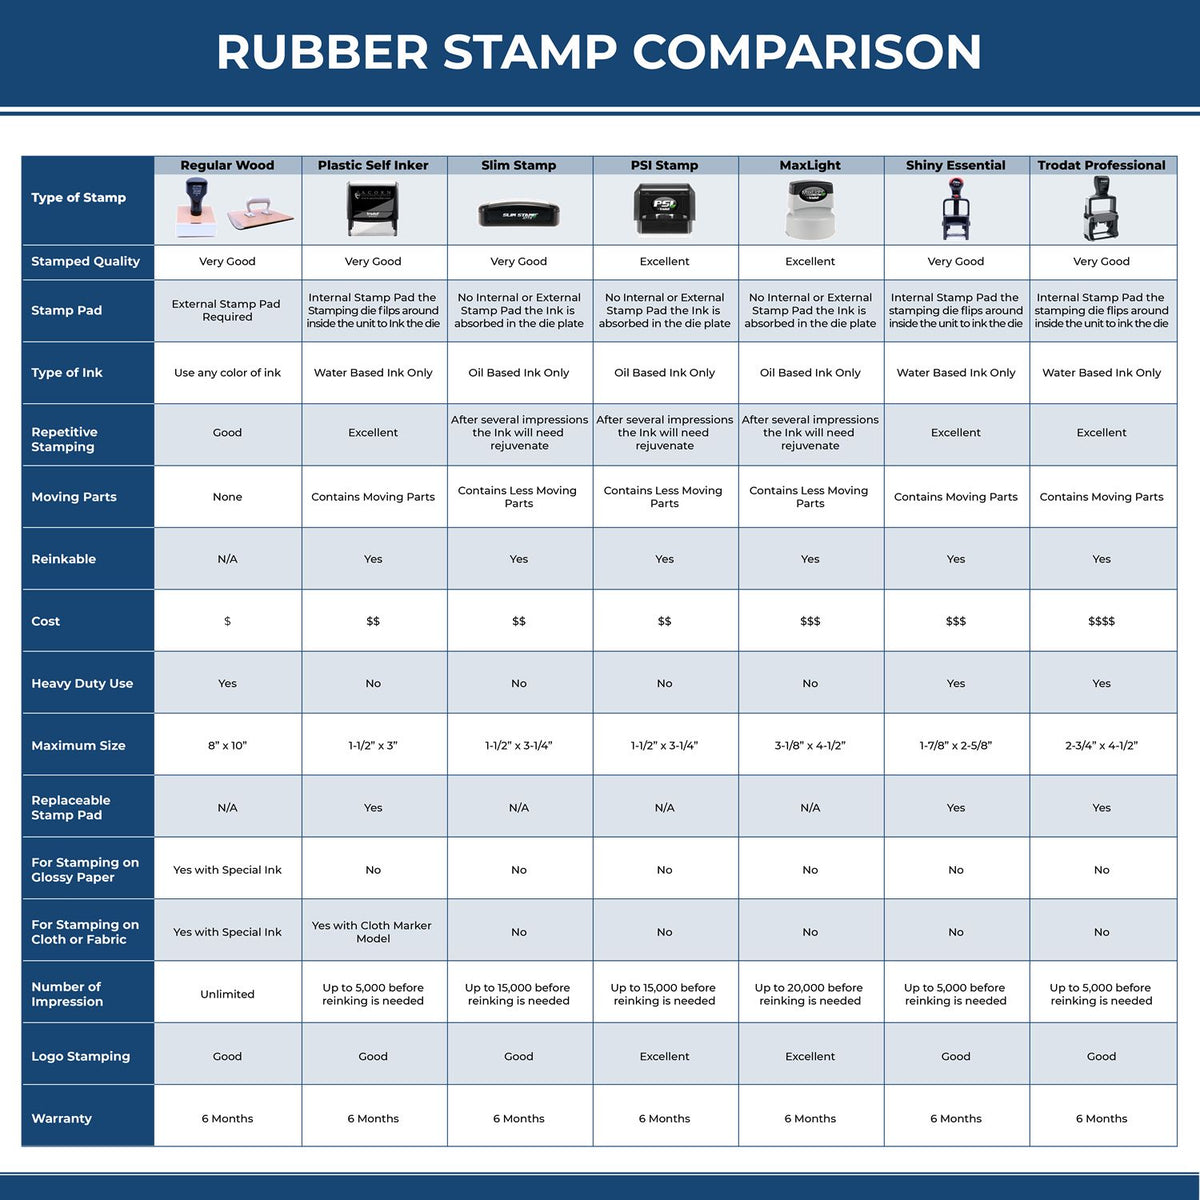 Large Read Route Rubber Stamp 4666R Rubber Stamp Comparison